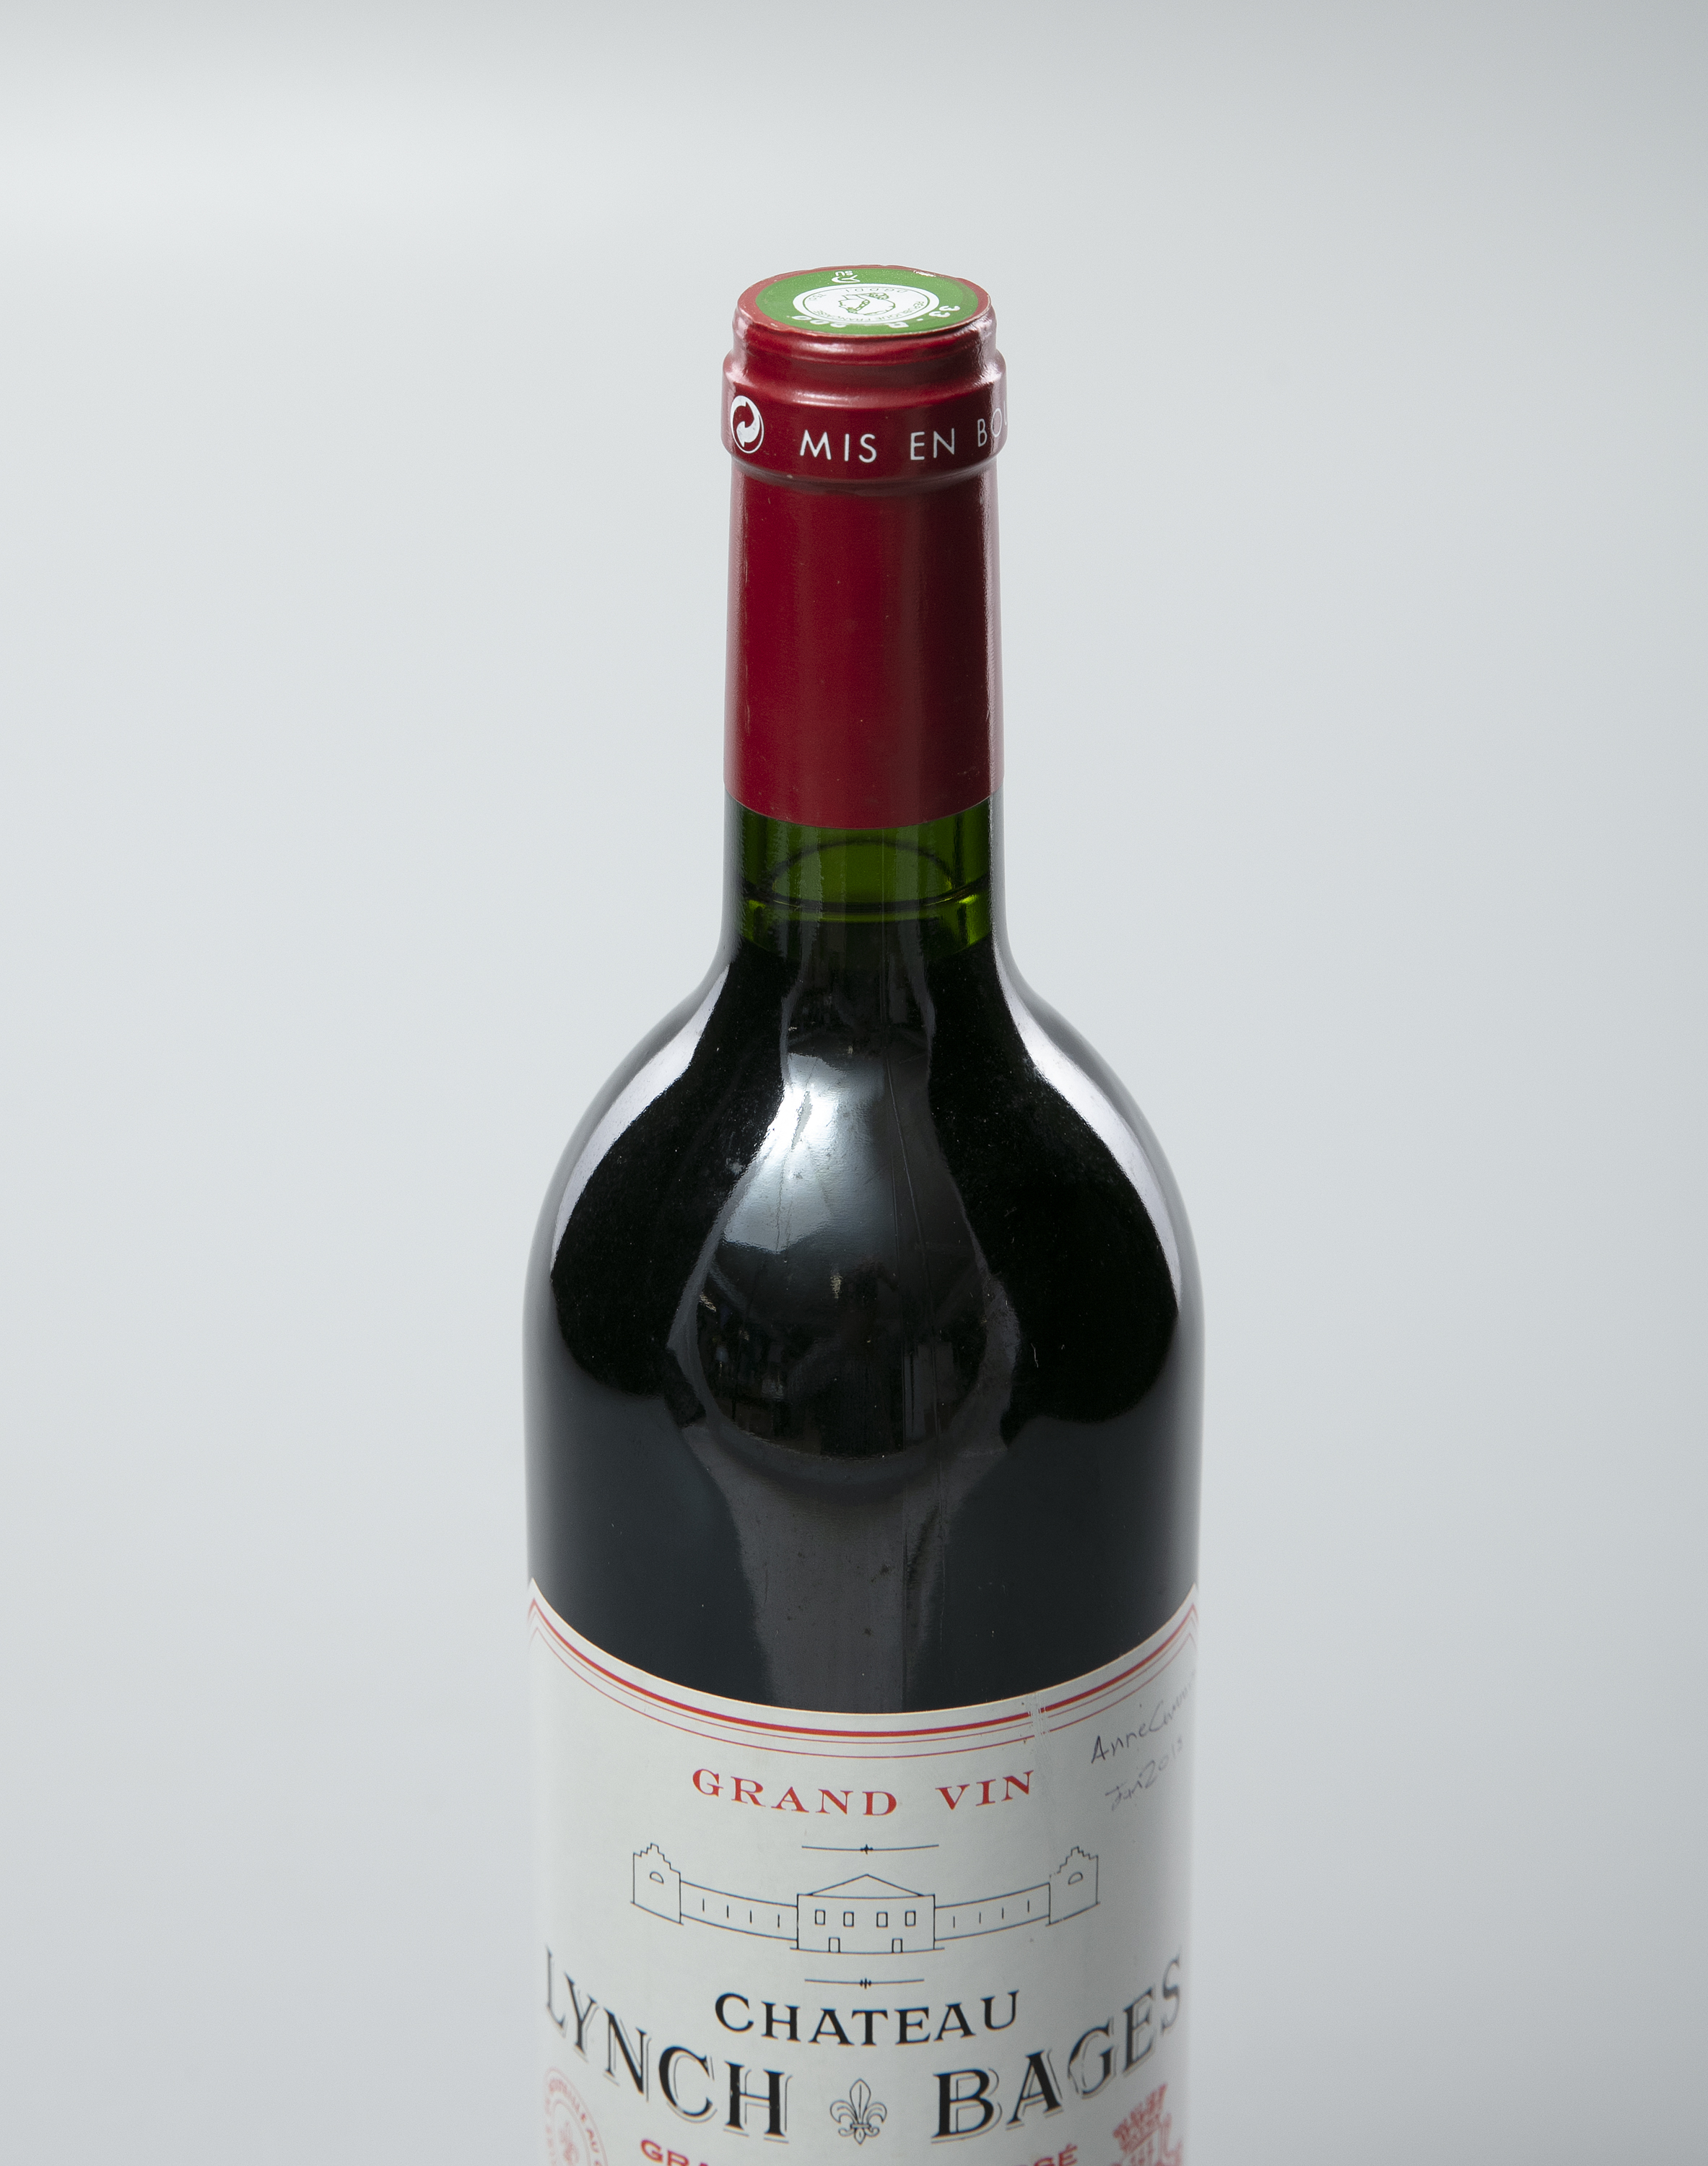 CHATEAU LYNCH BAGES Pauillac, 2002 1 bottle - Image 5 of 6